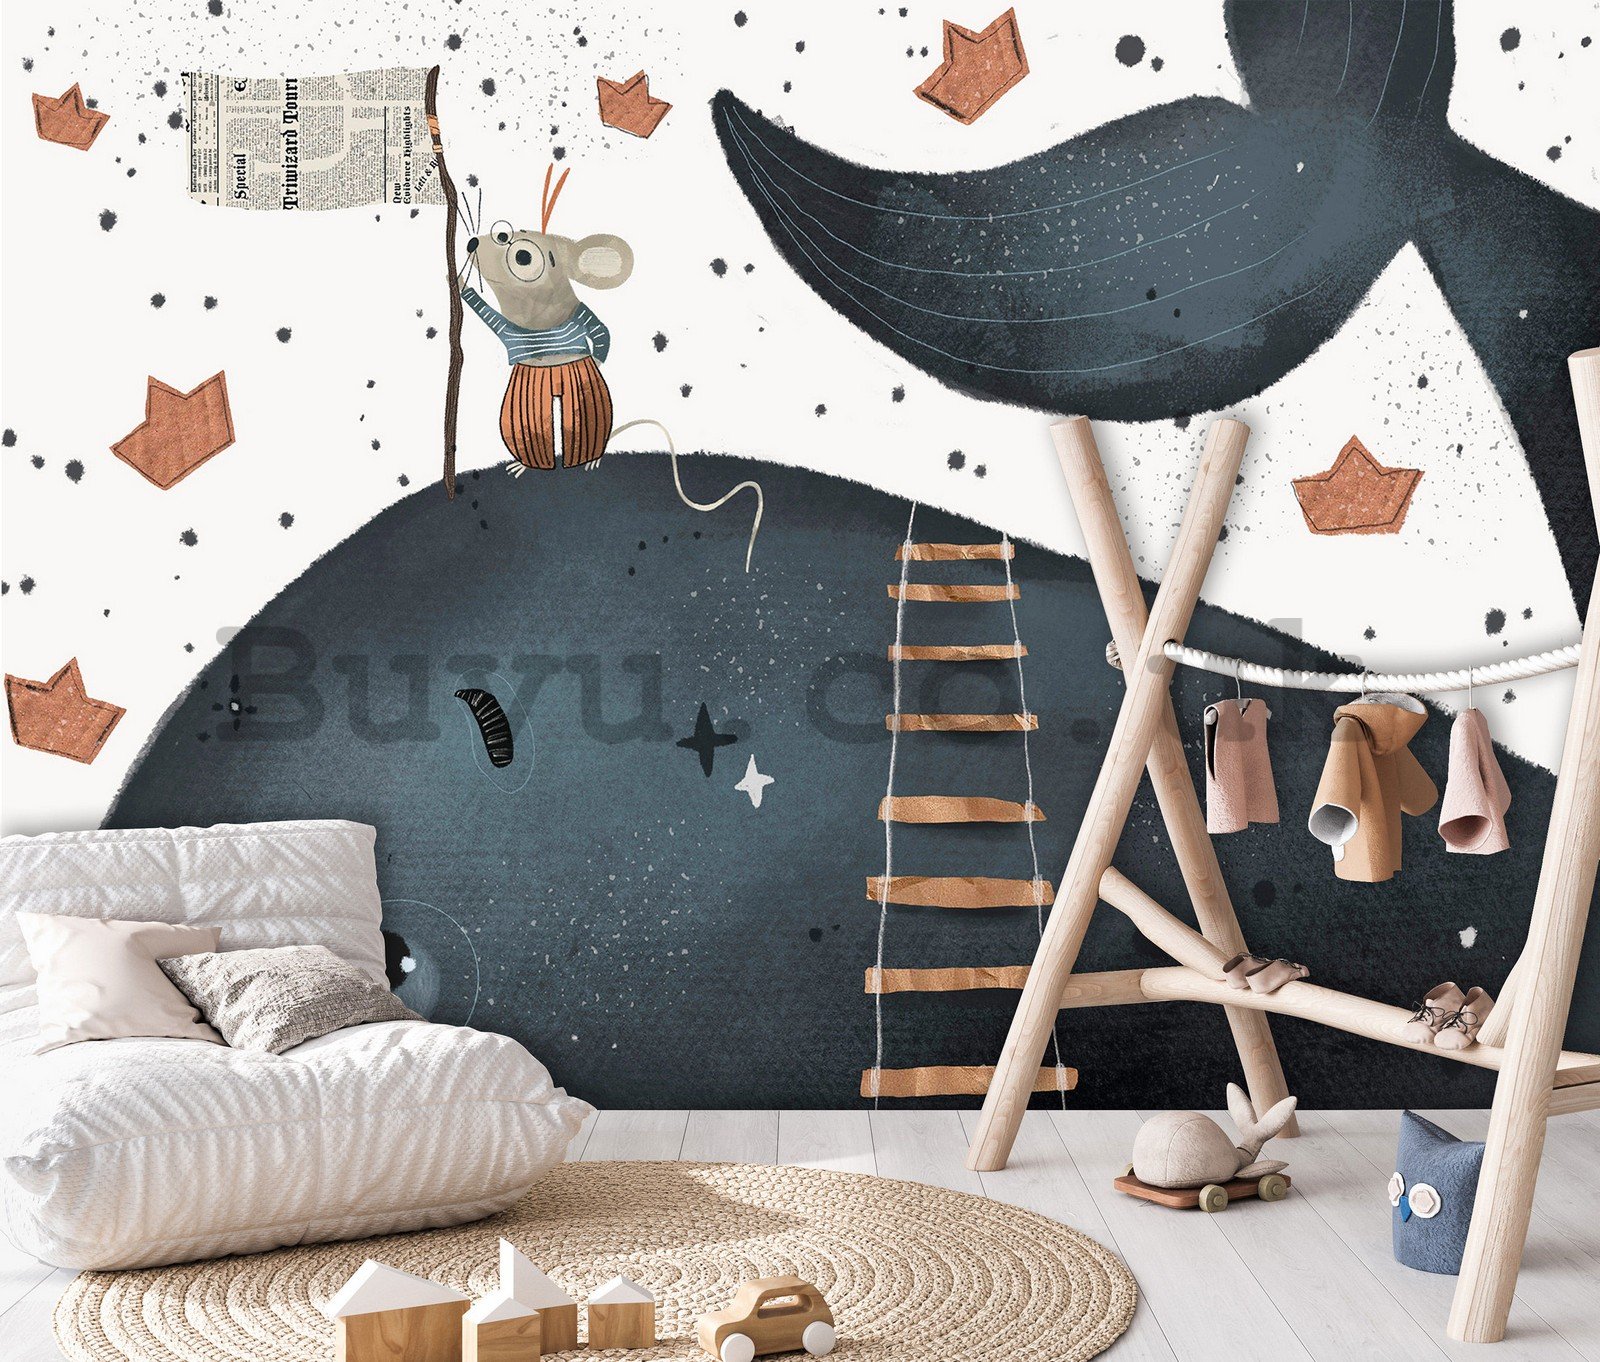 Wall mural vlies: Children's wallpaper whale and mouse - 254x184 cm